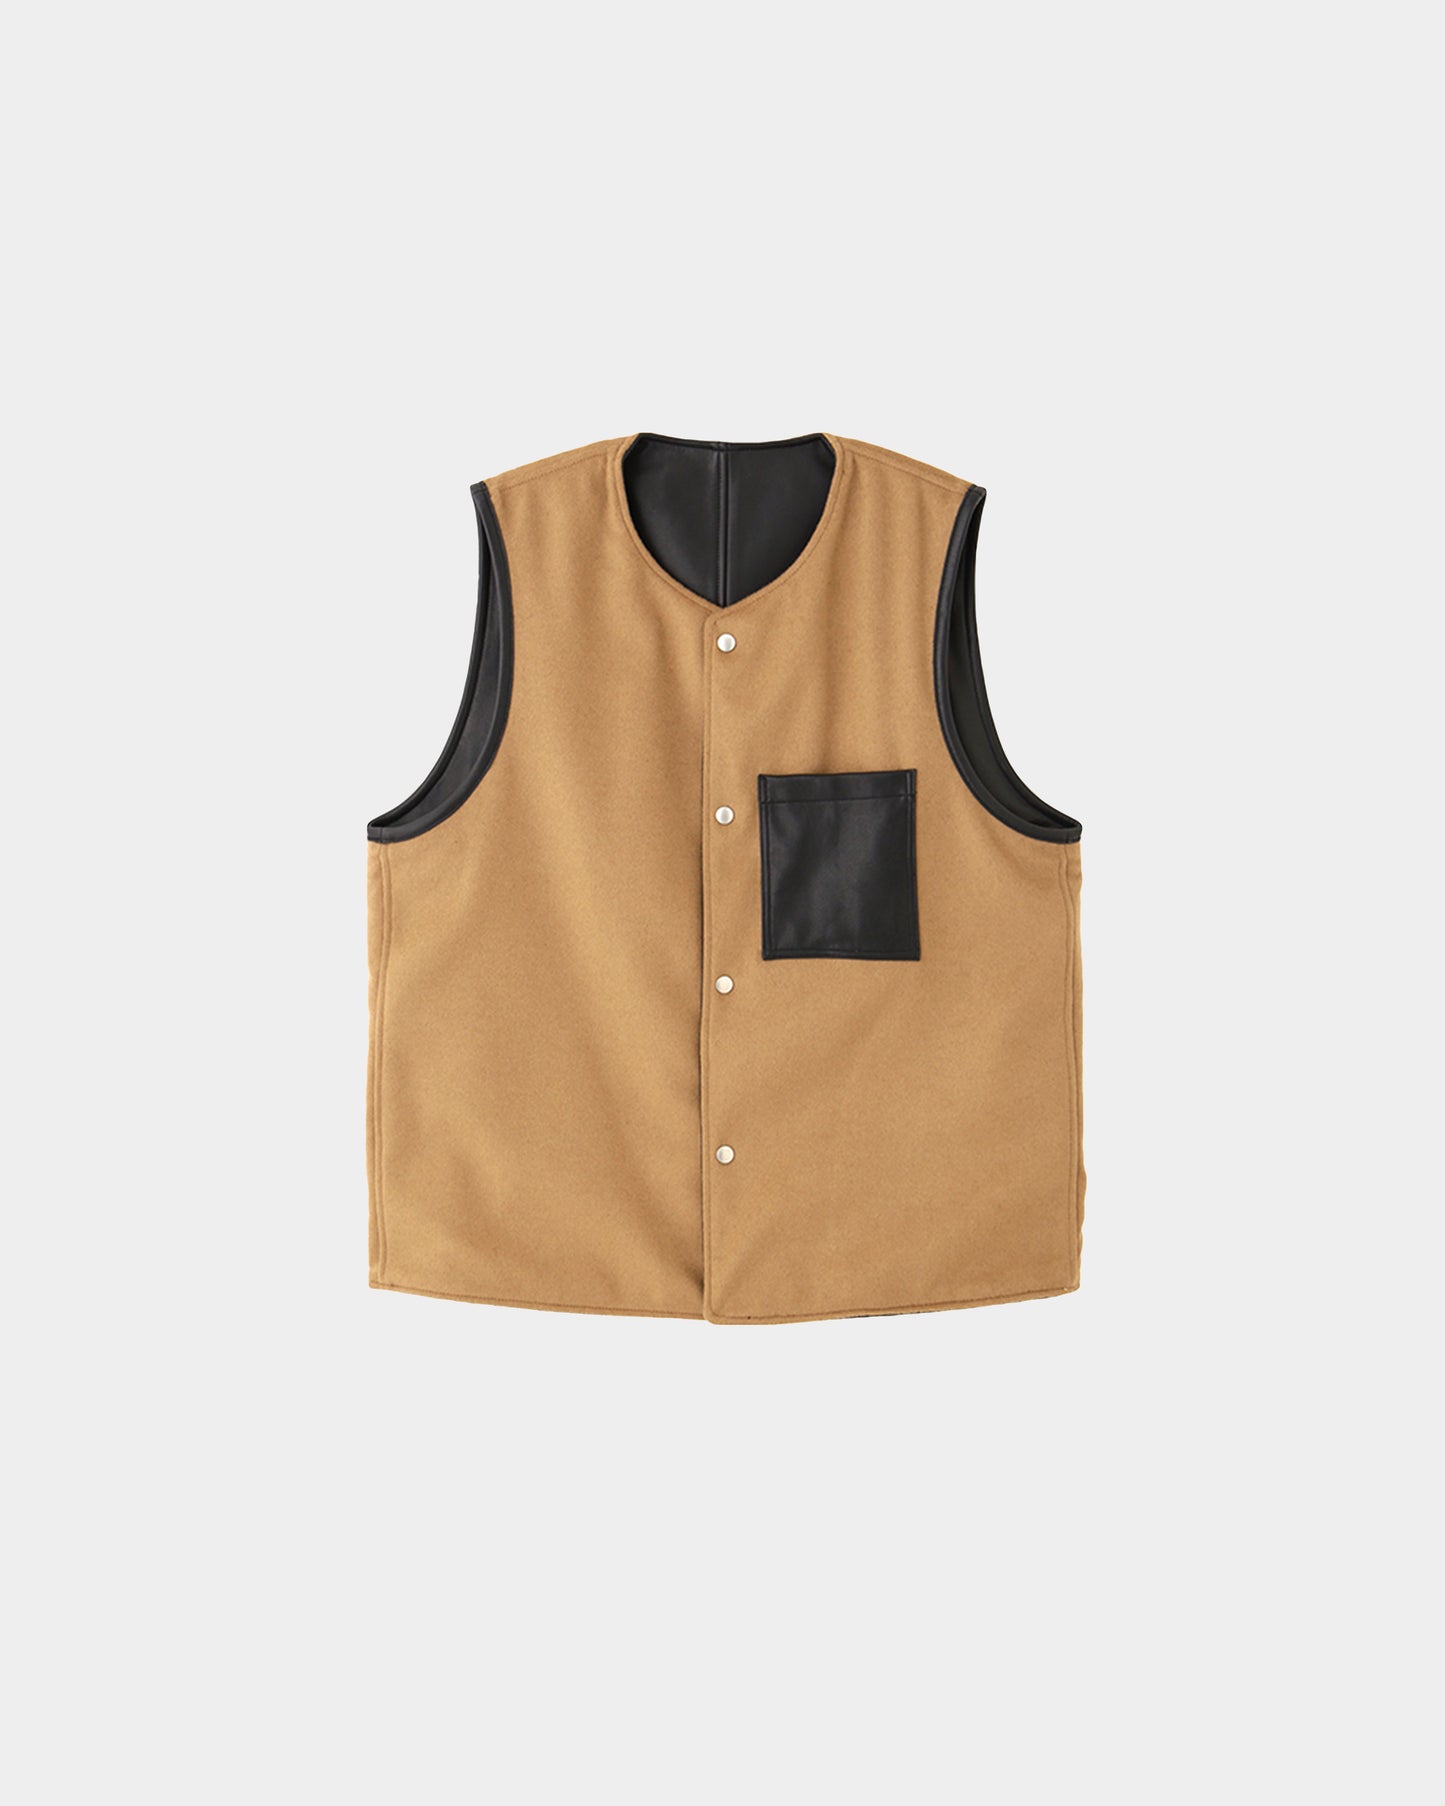 seven by seven/REVERSIBLE LEATHER VEST - Cow leather/Cashmere beaver -